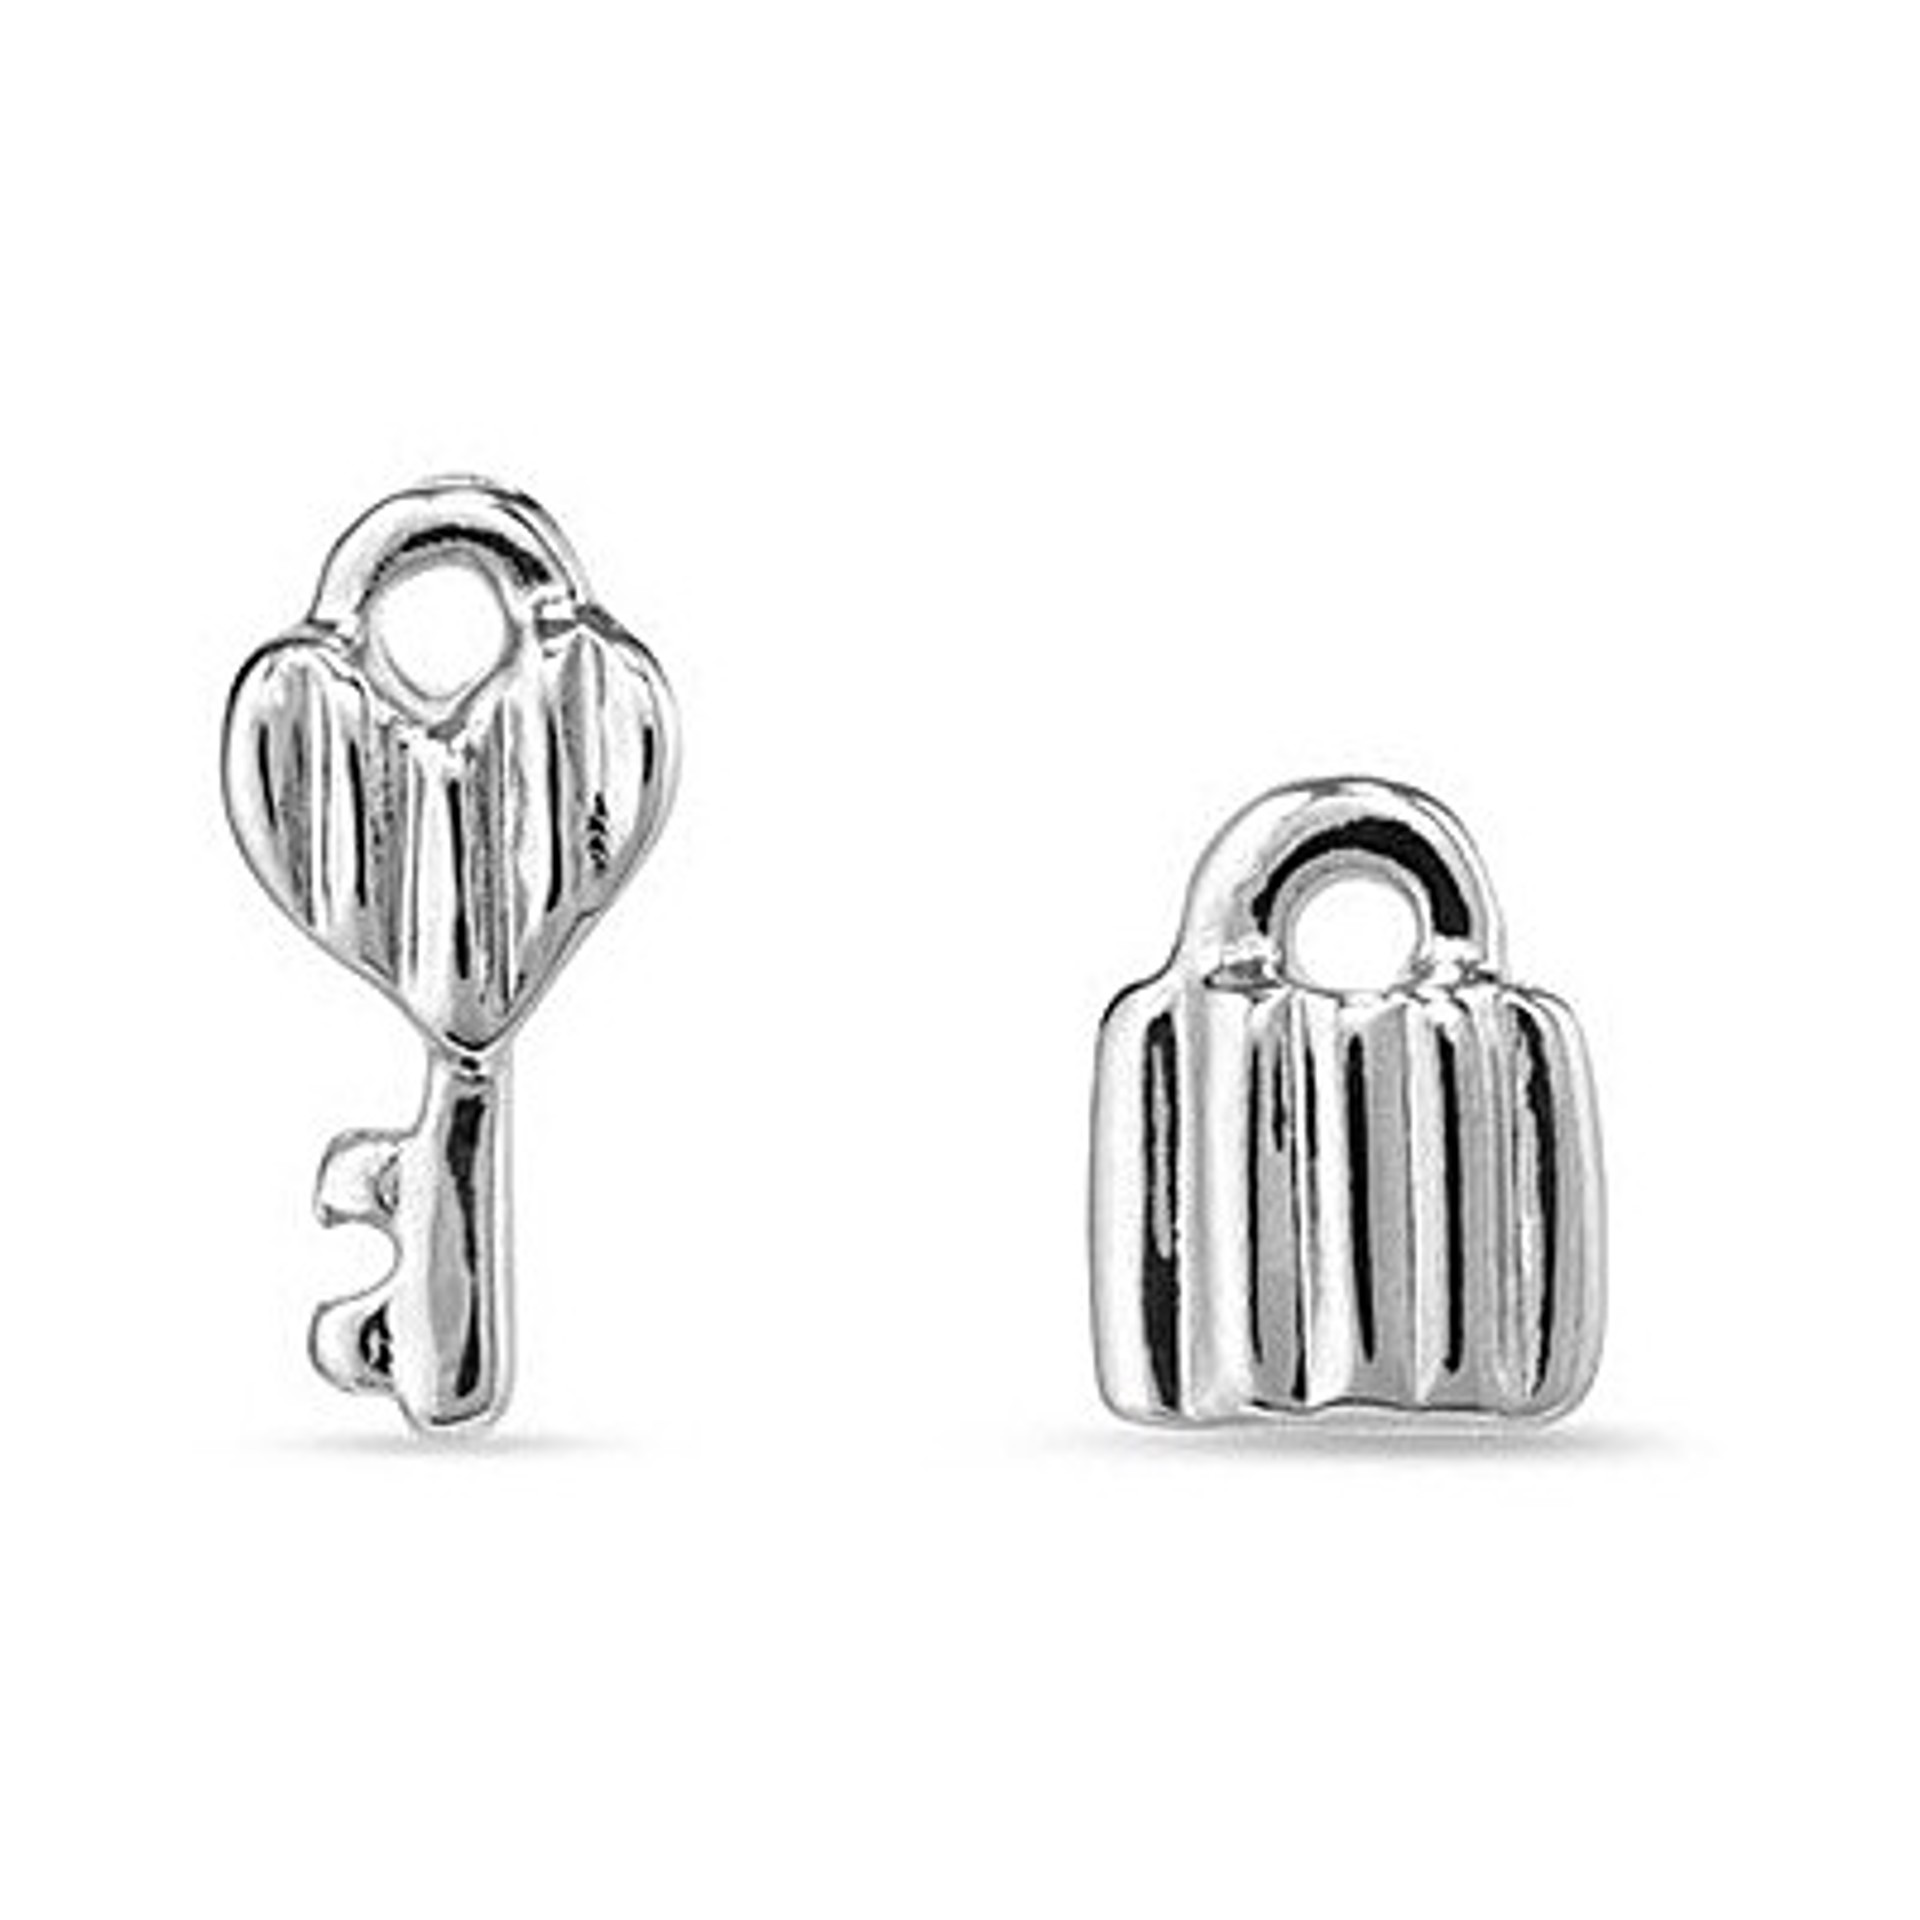 9442 Silver Plated Lock and Key Studs by UNO DE 50